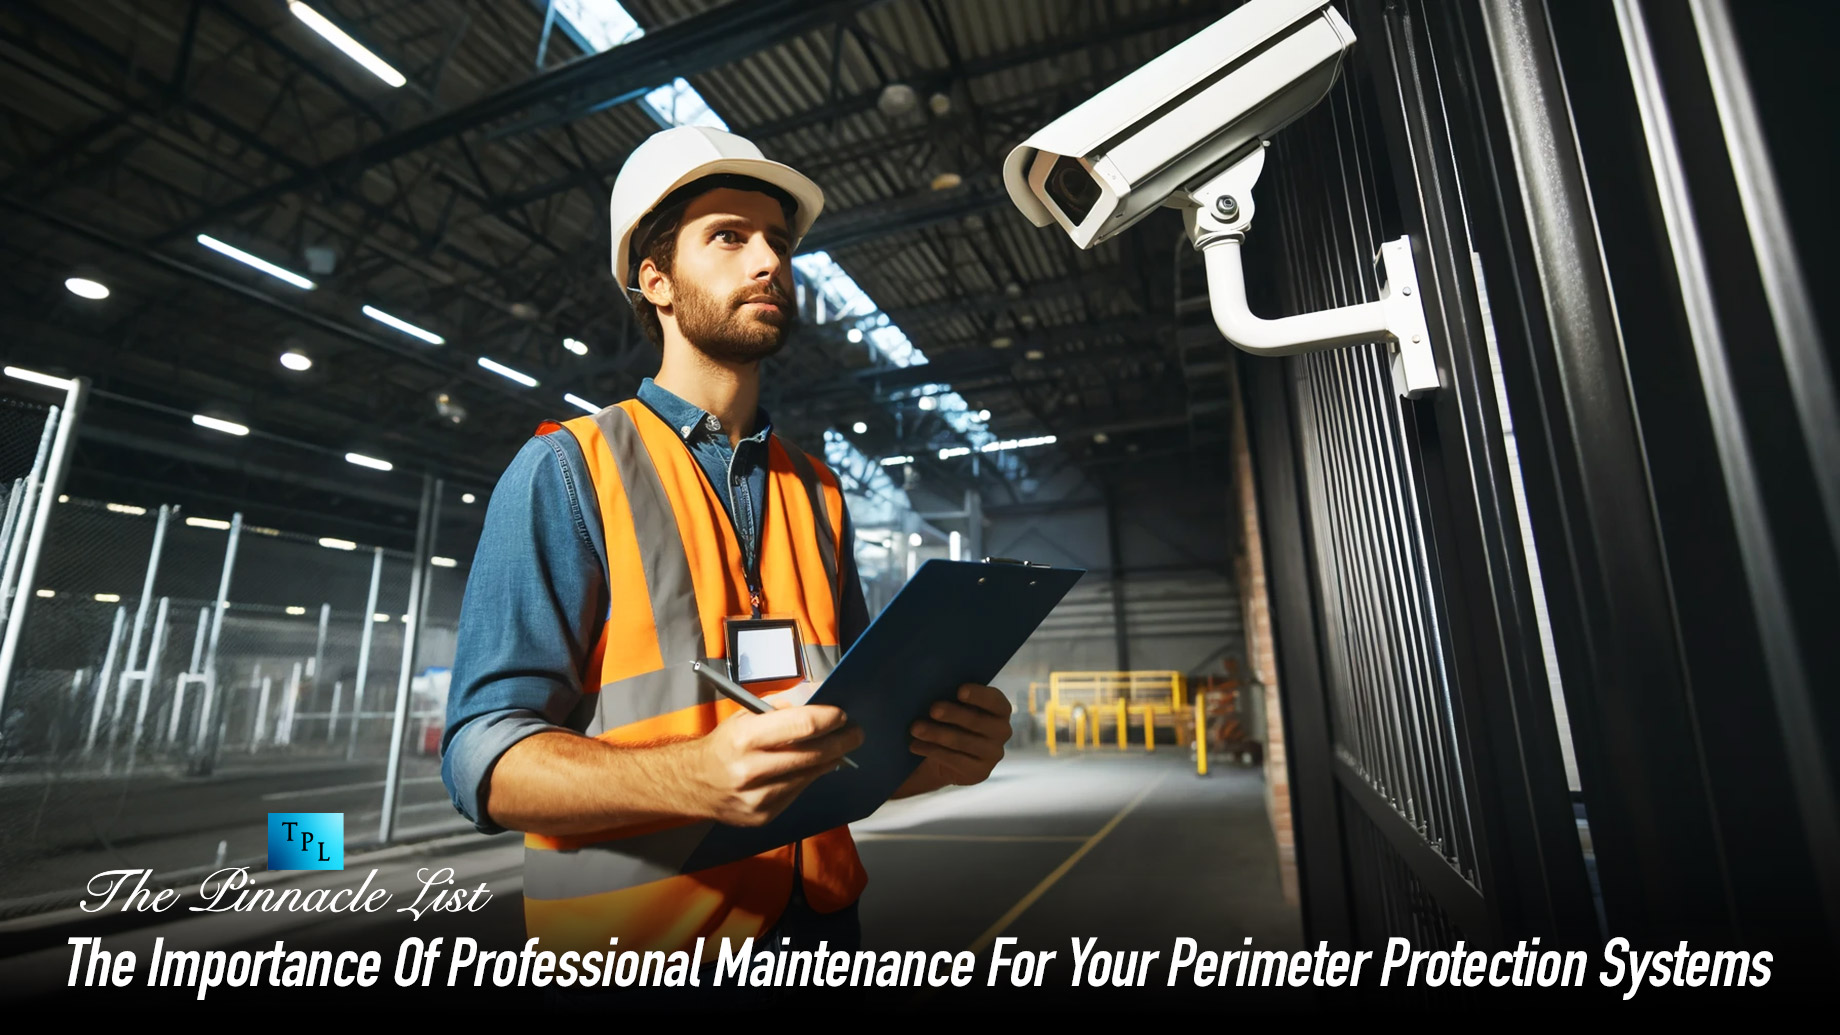 The Importance Of Professional Maintenance For Your Perimeter Protection Systems